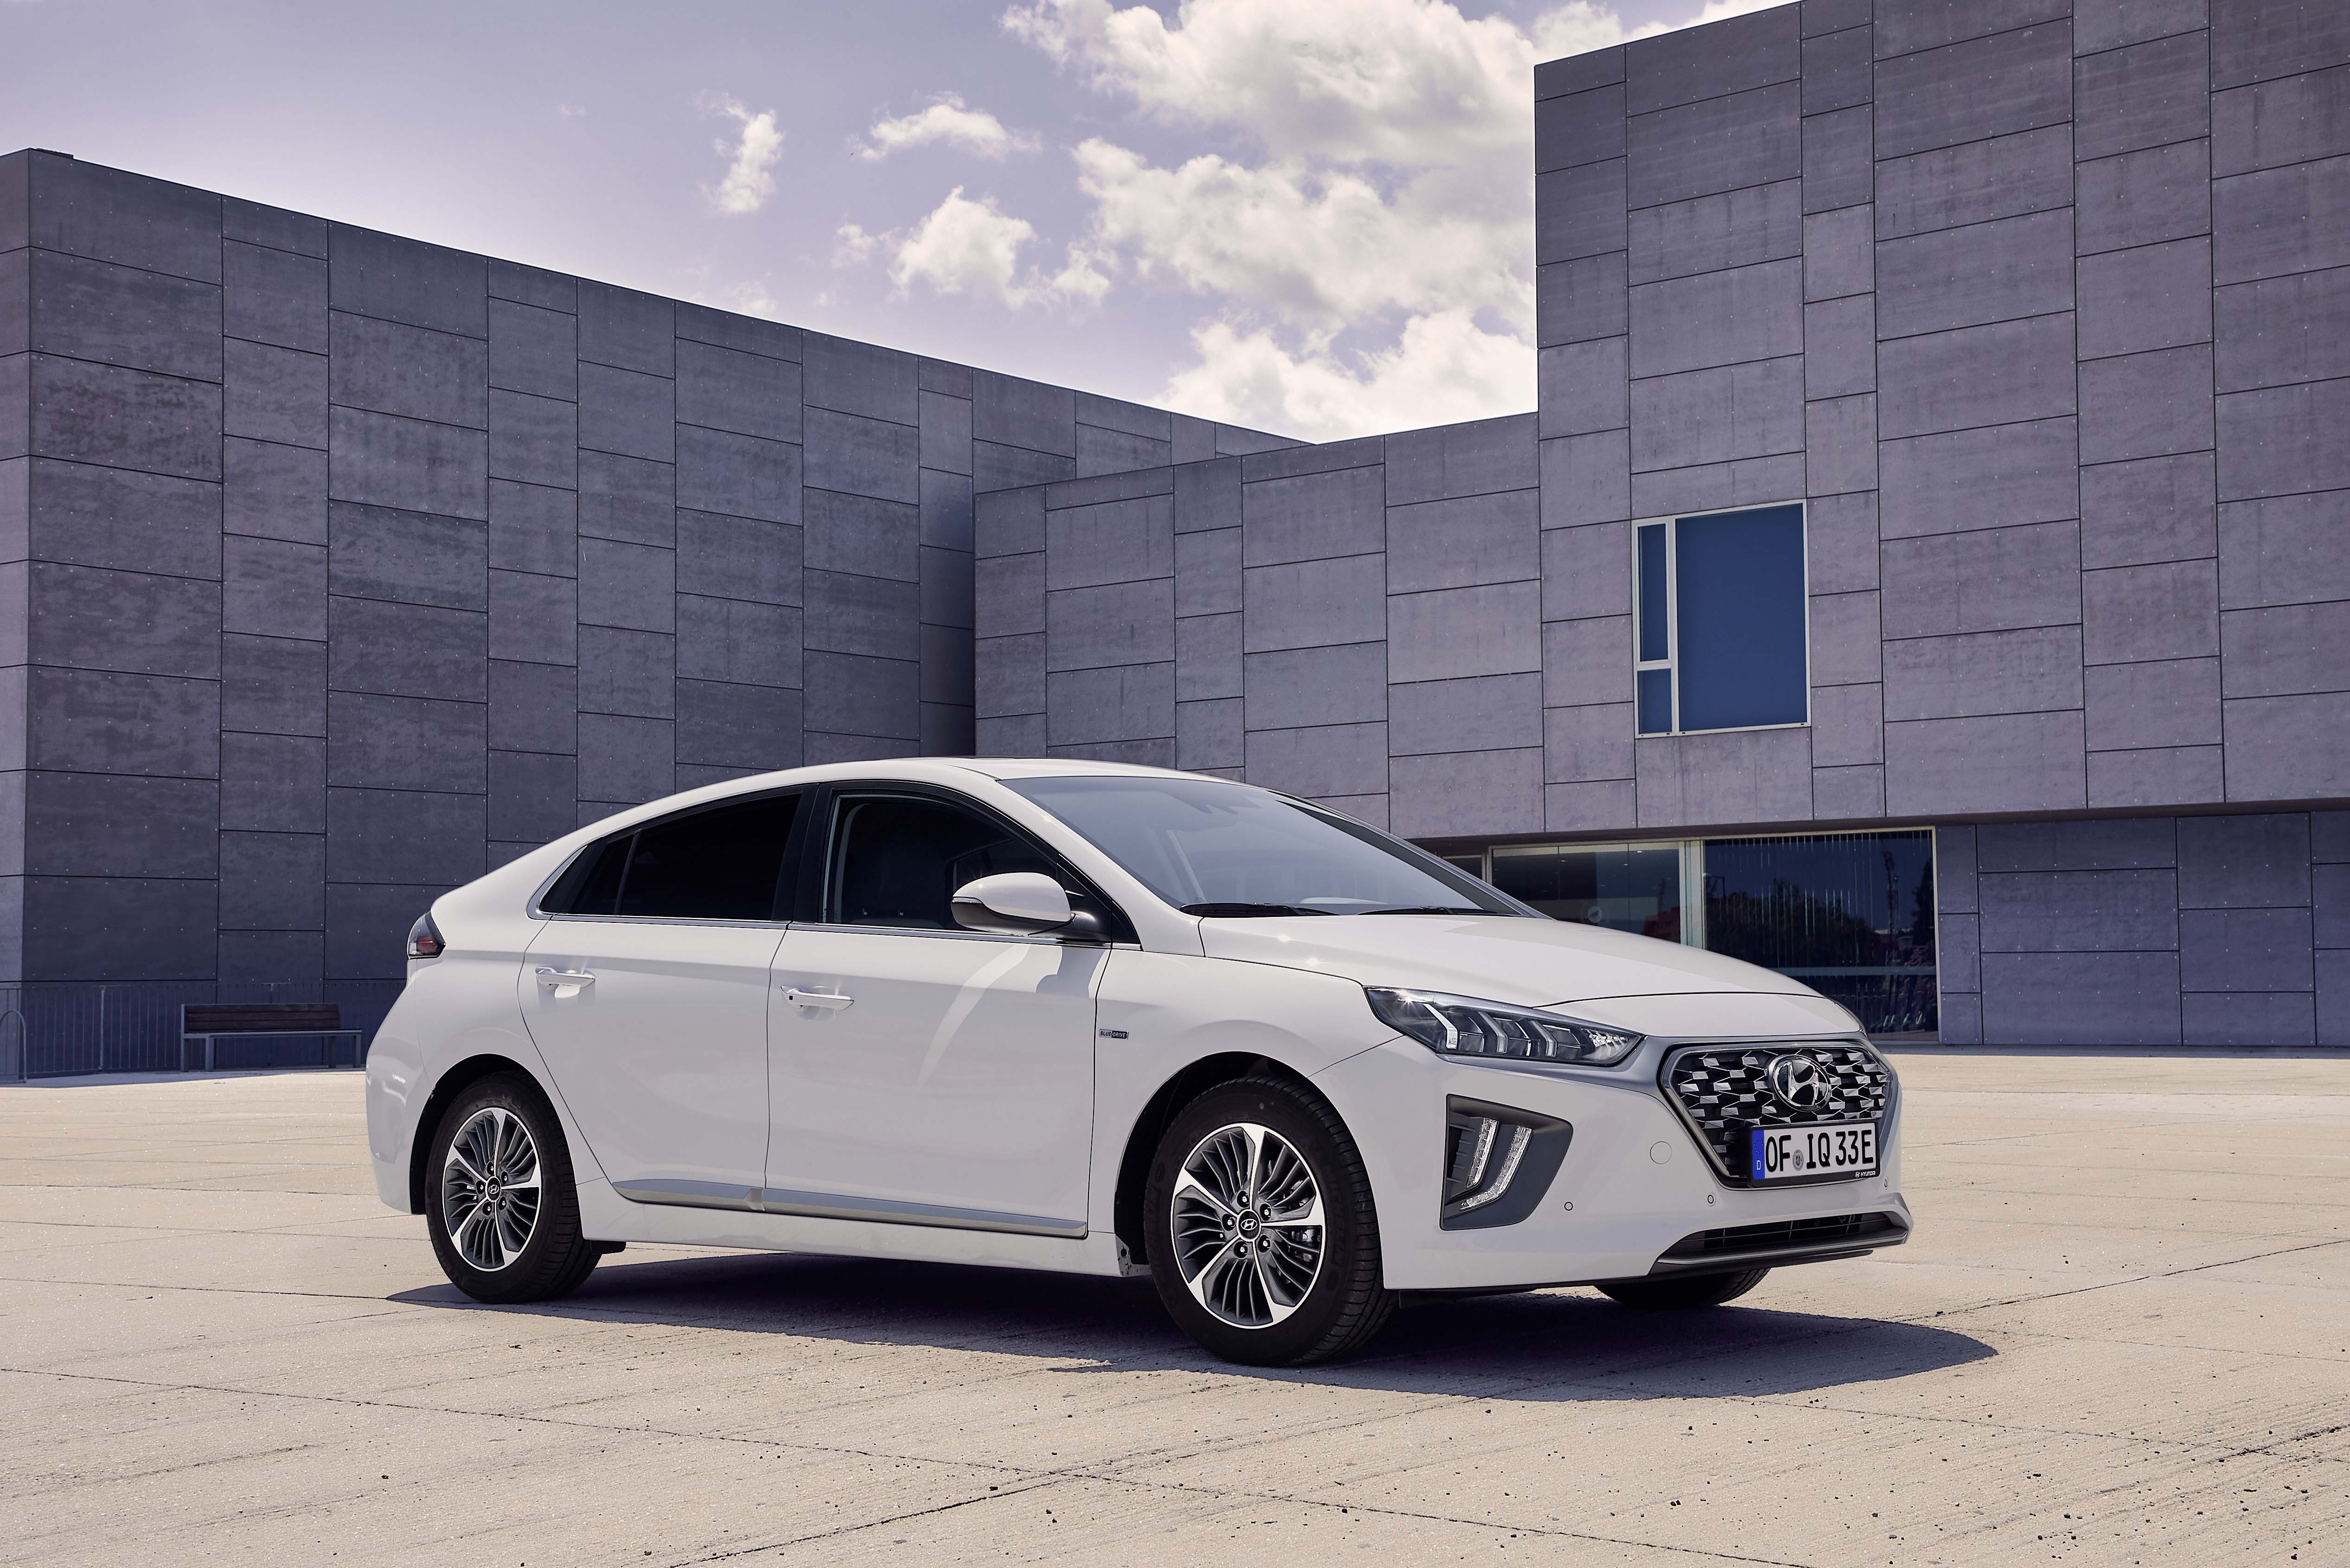 Facelifted Hyundai Ioniq on sale now | Carbuyer